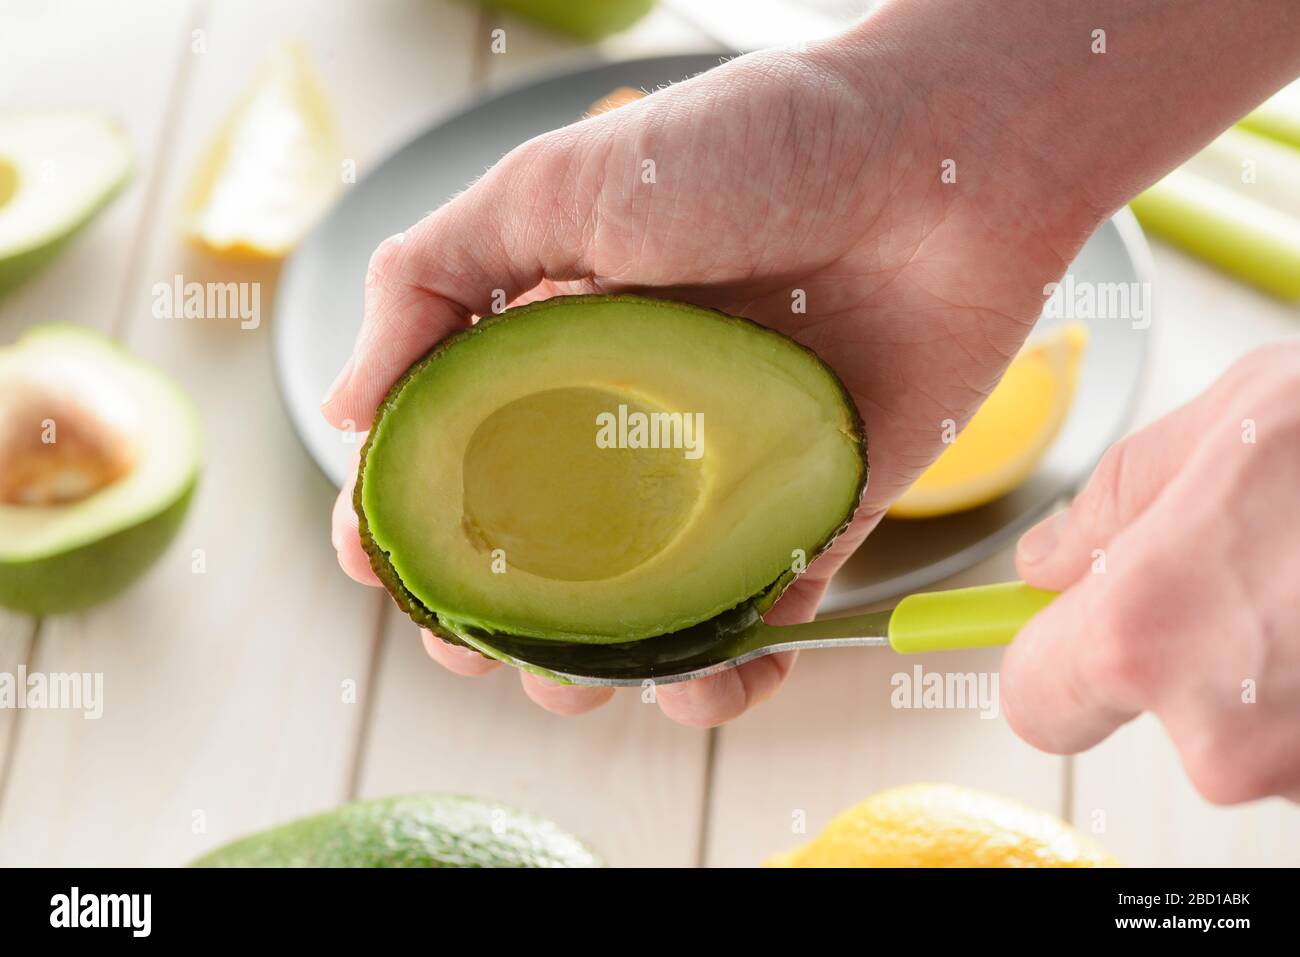 Man preparing avocado, scooping its flesh out with a spoon Stock Photo